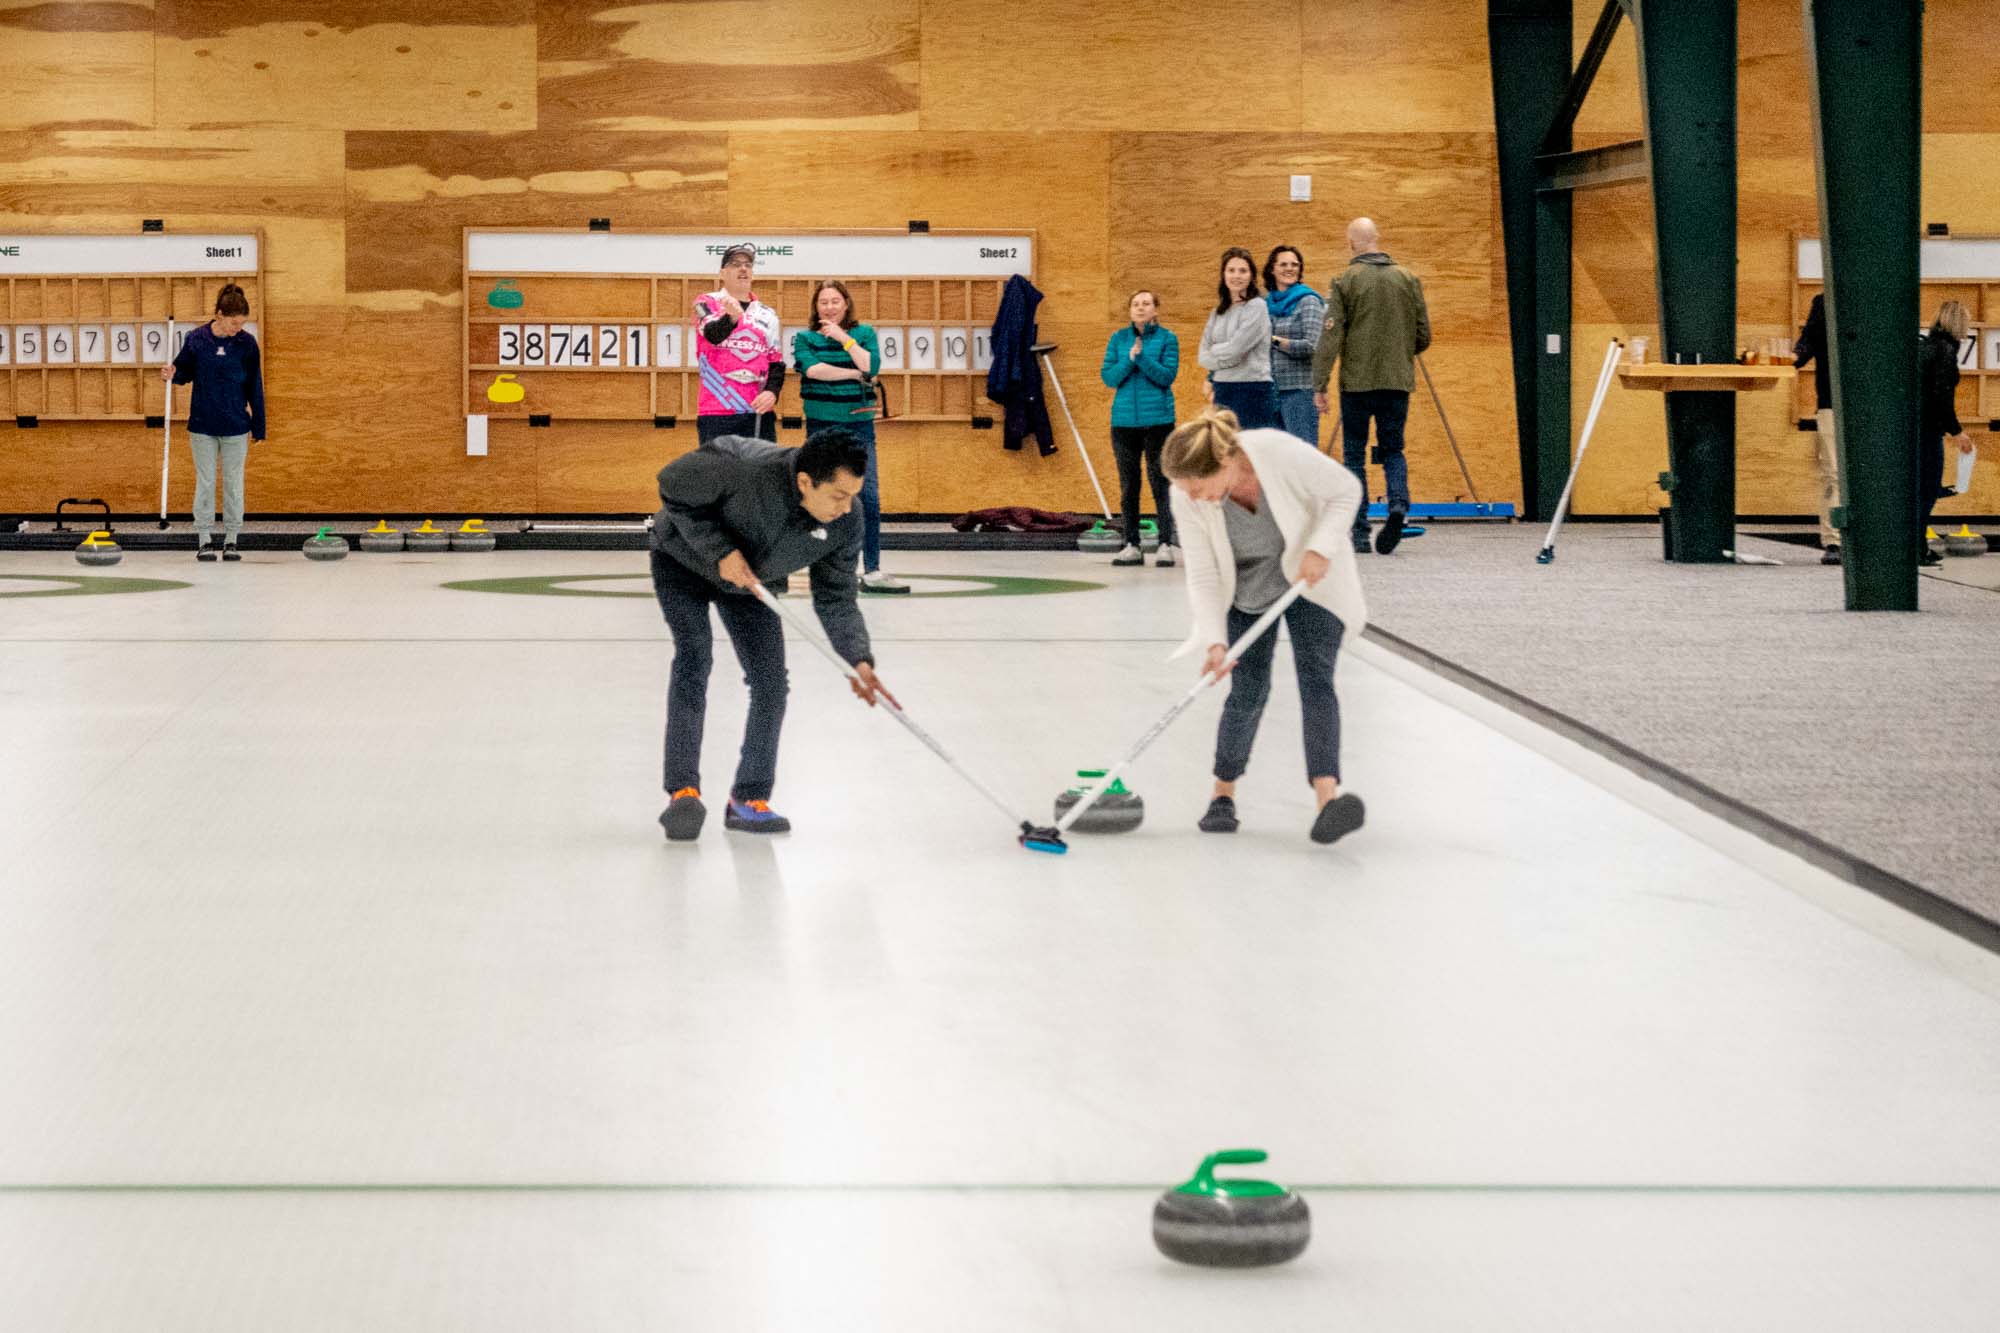 People curling stones on an ice rink